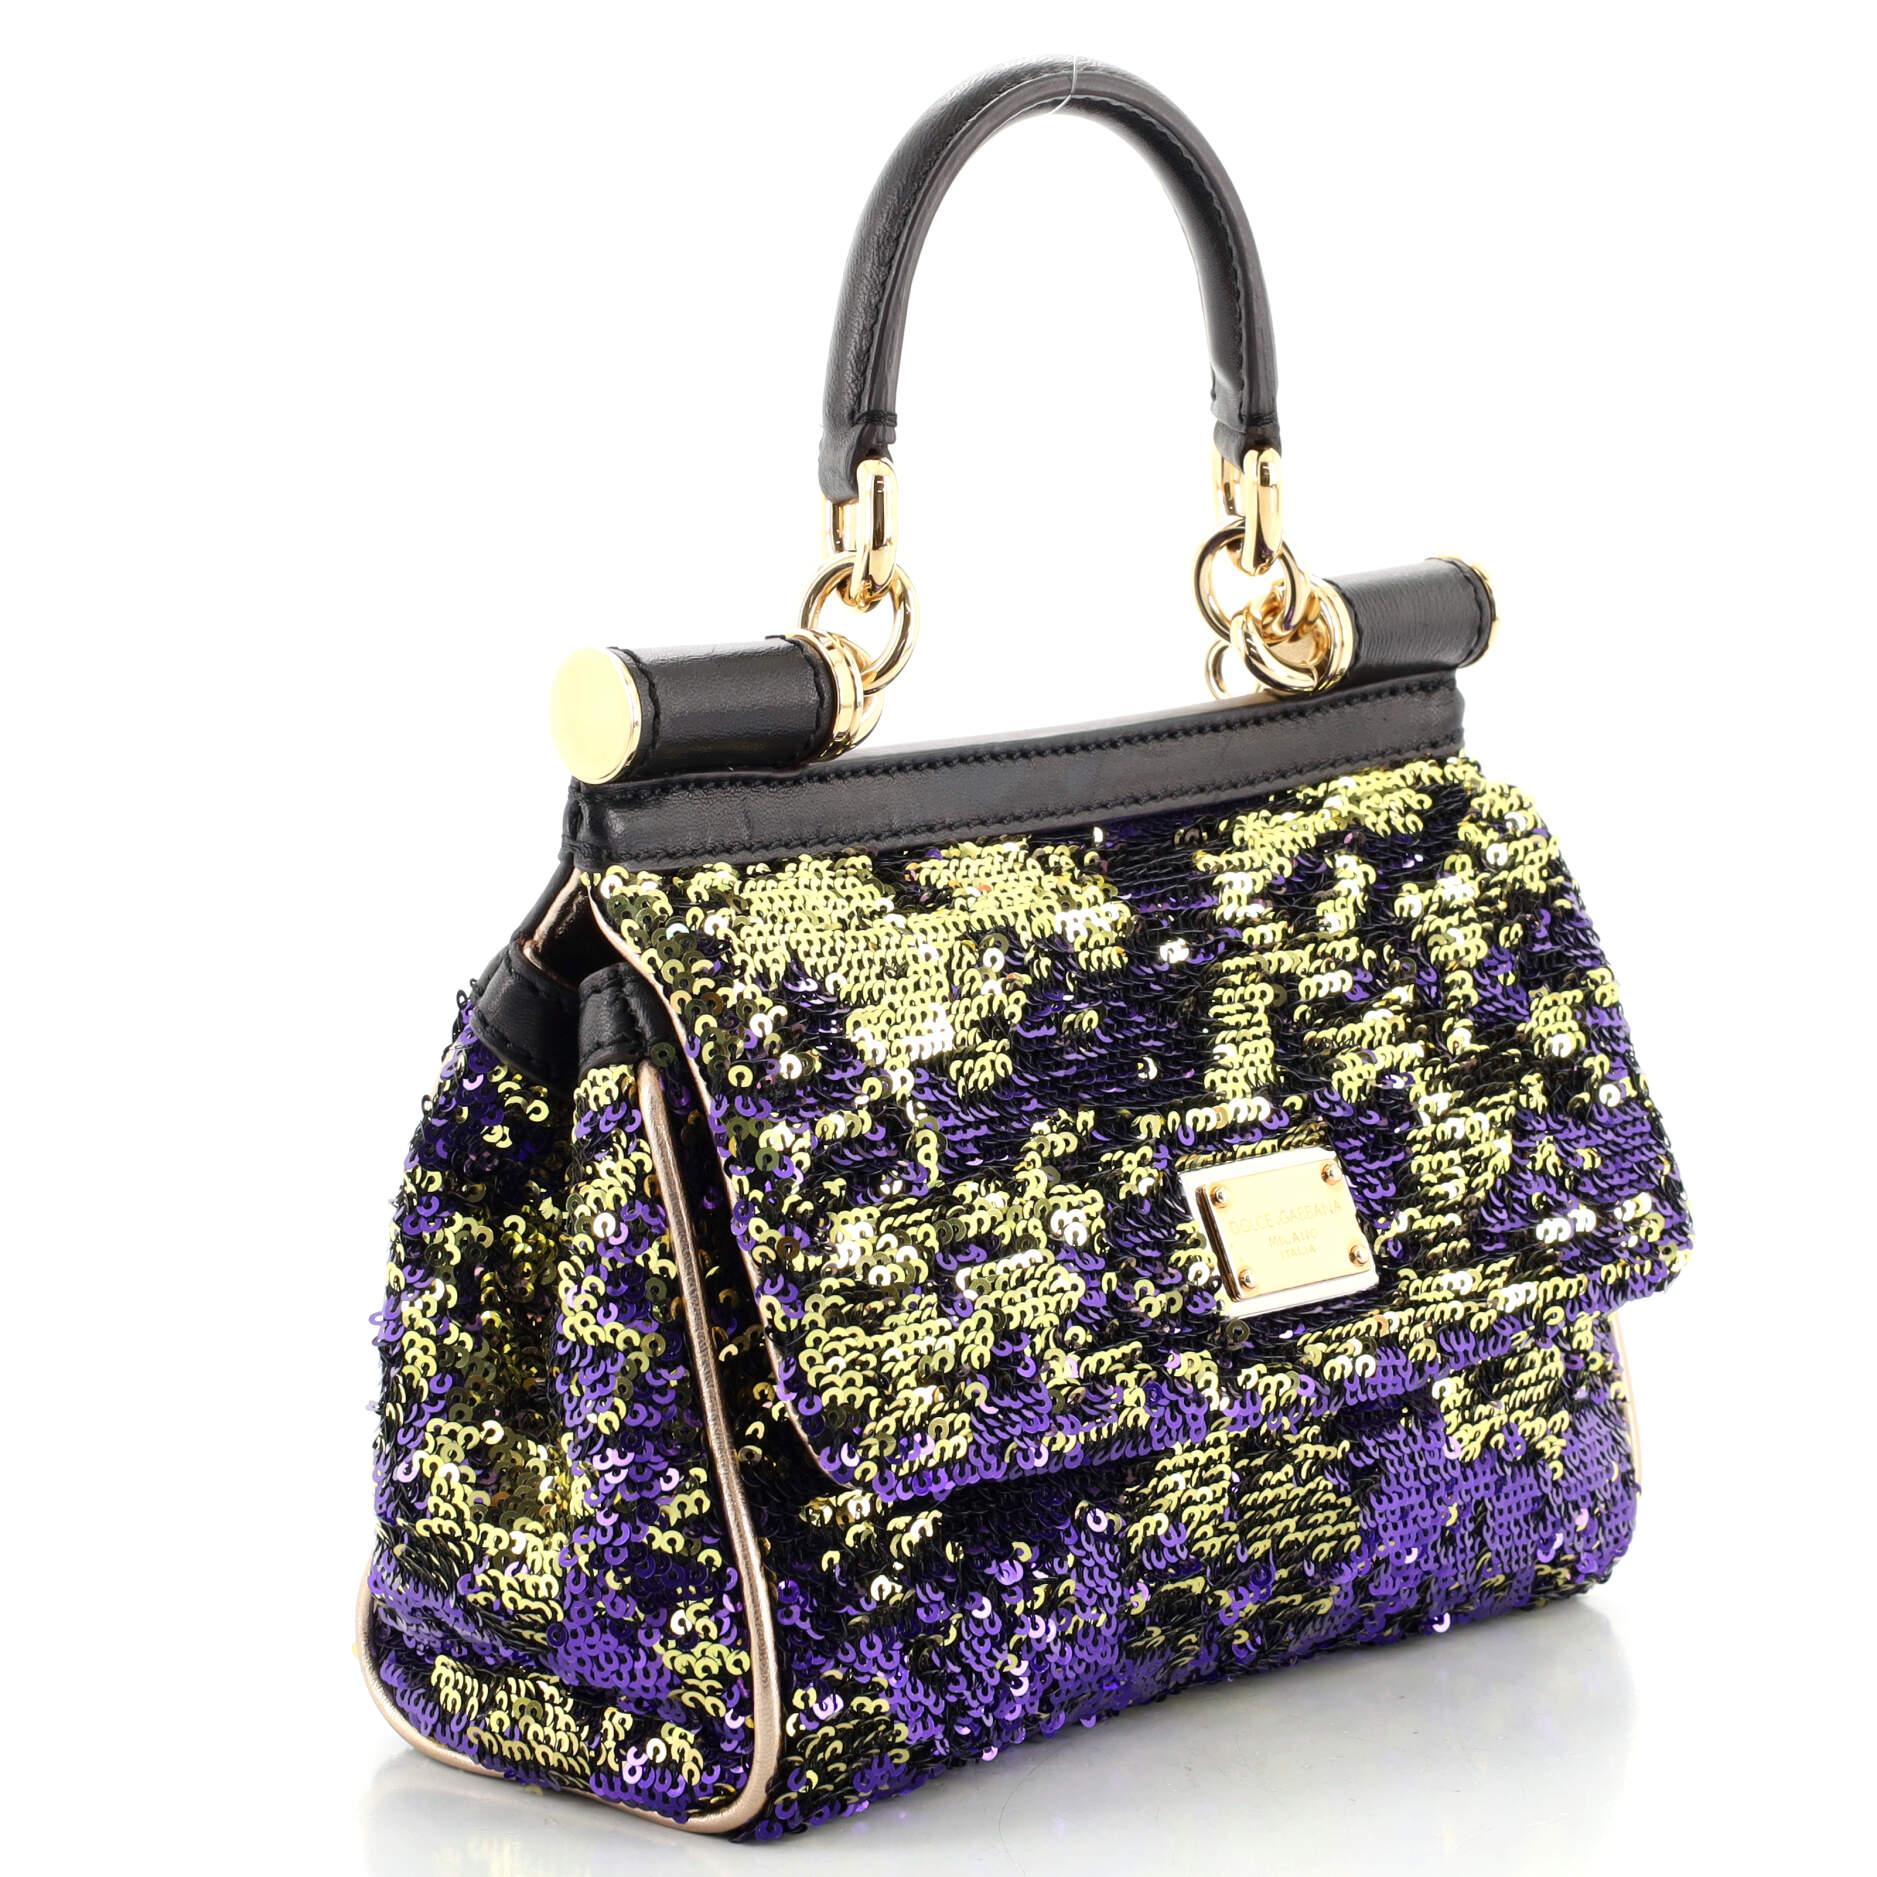 dolce and gabbana miss sicily bag